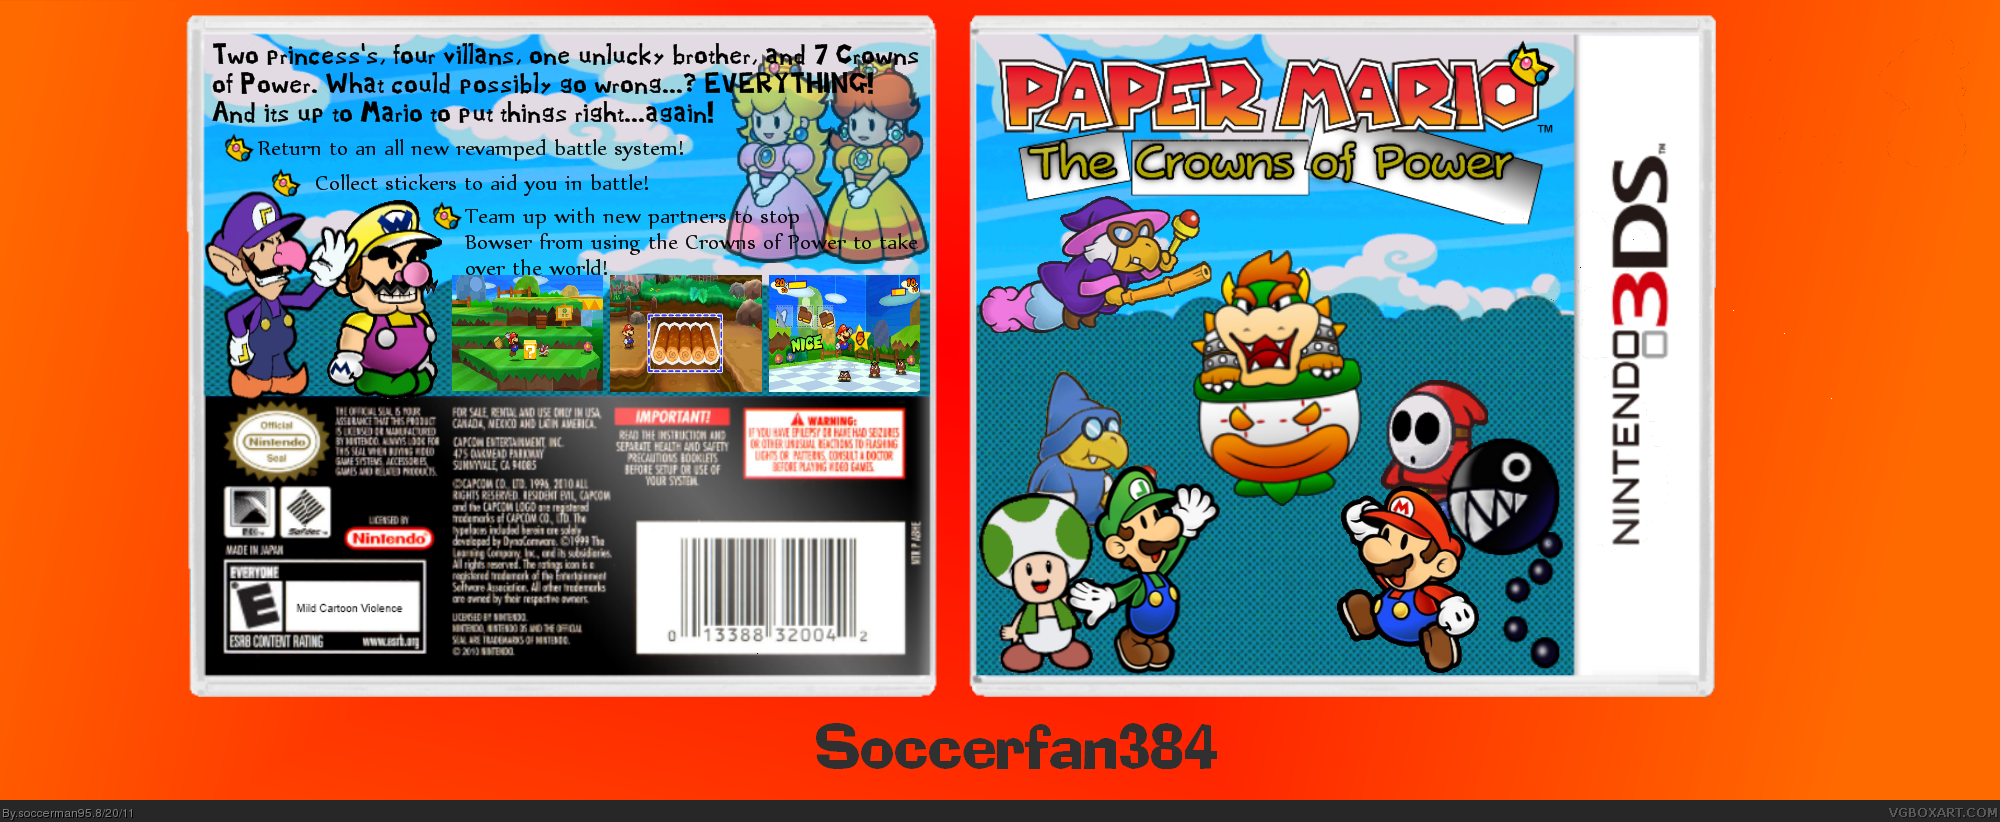 Paper Mario: The Crowns of Power box cover